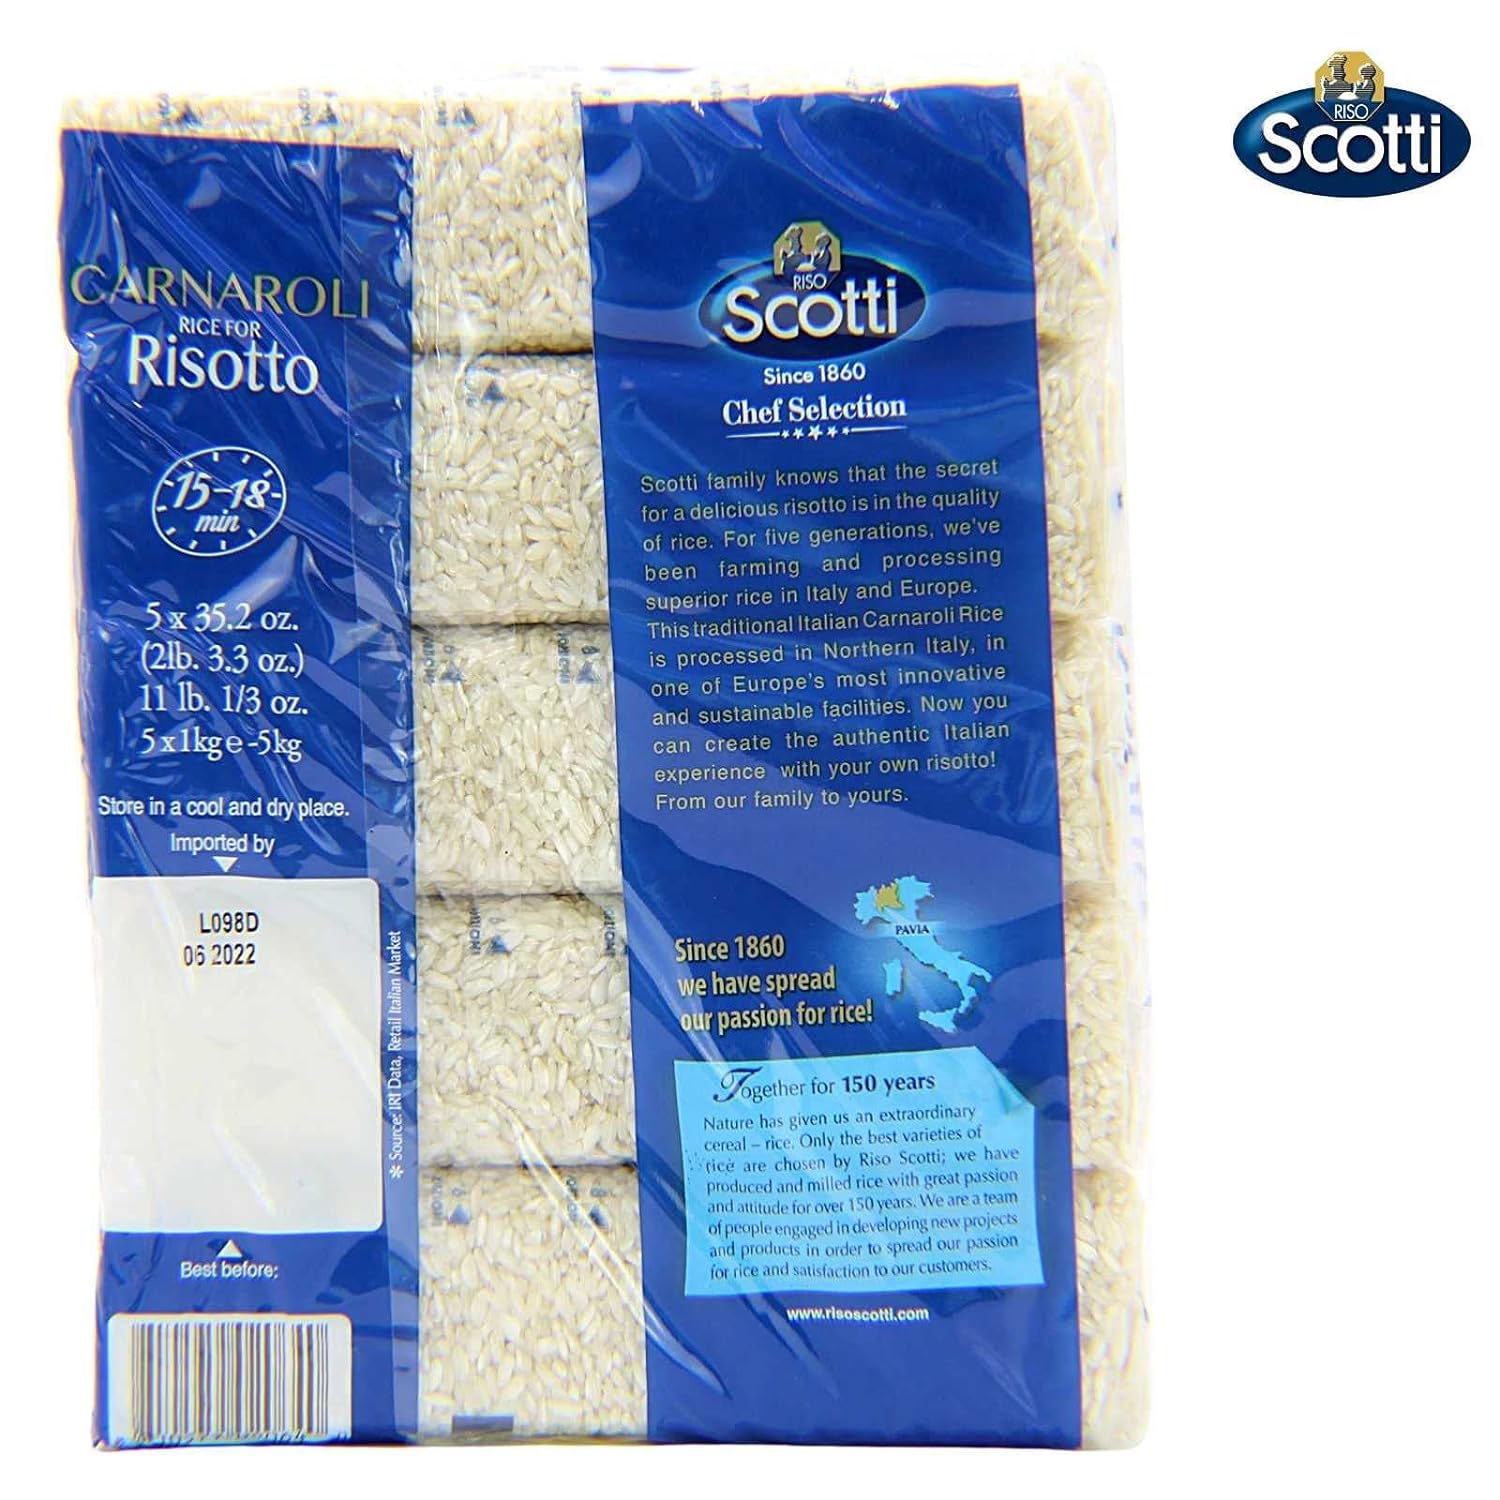 Carnaroli Rice for Risotto, 11 lbs (5x1 kg), Product of Italy, Chef Selection, Gluten Free, Non-GMO, Vacuumed Packed, Riso Scotti : Everything Else